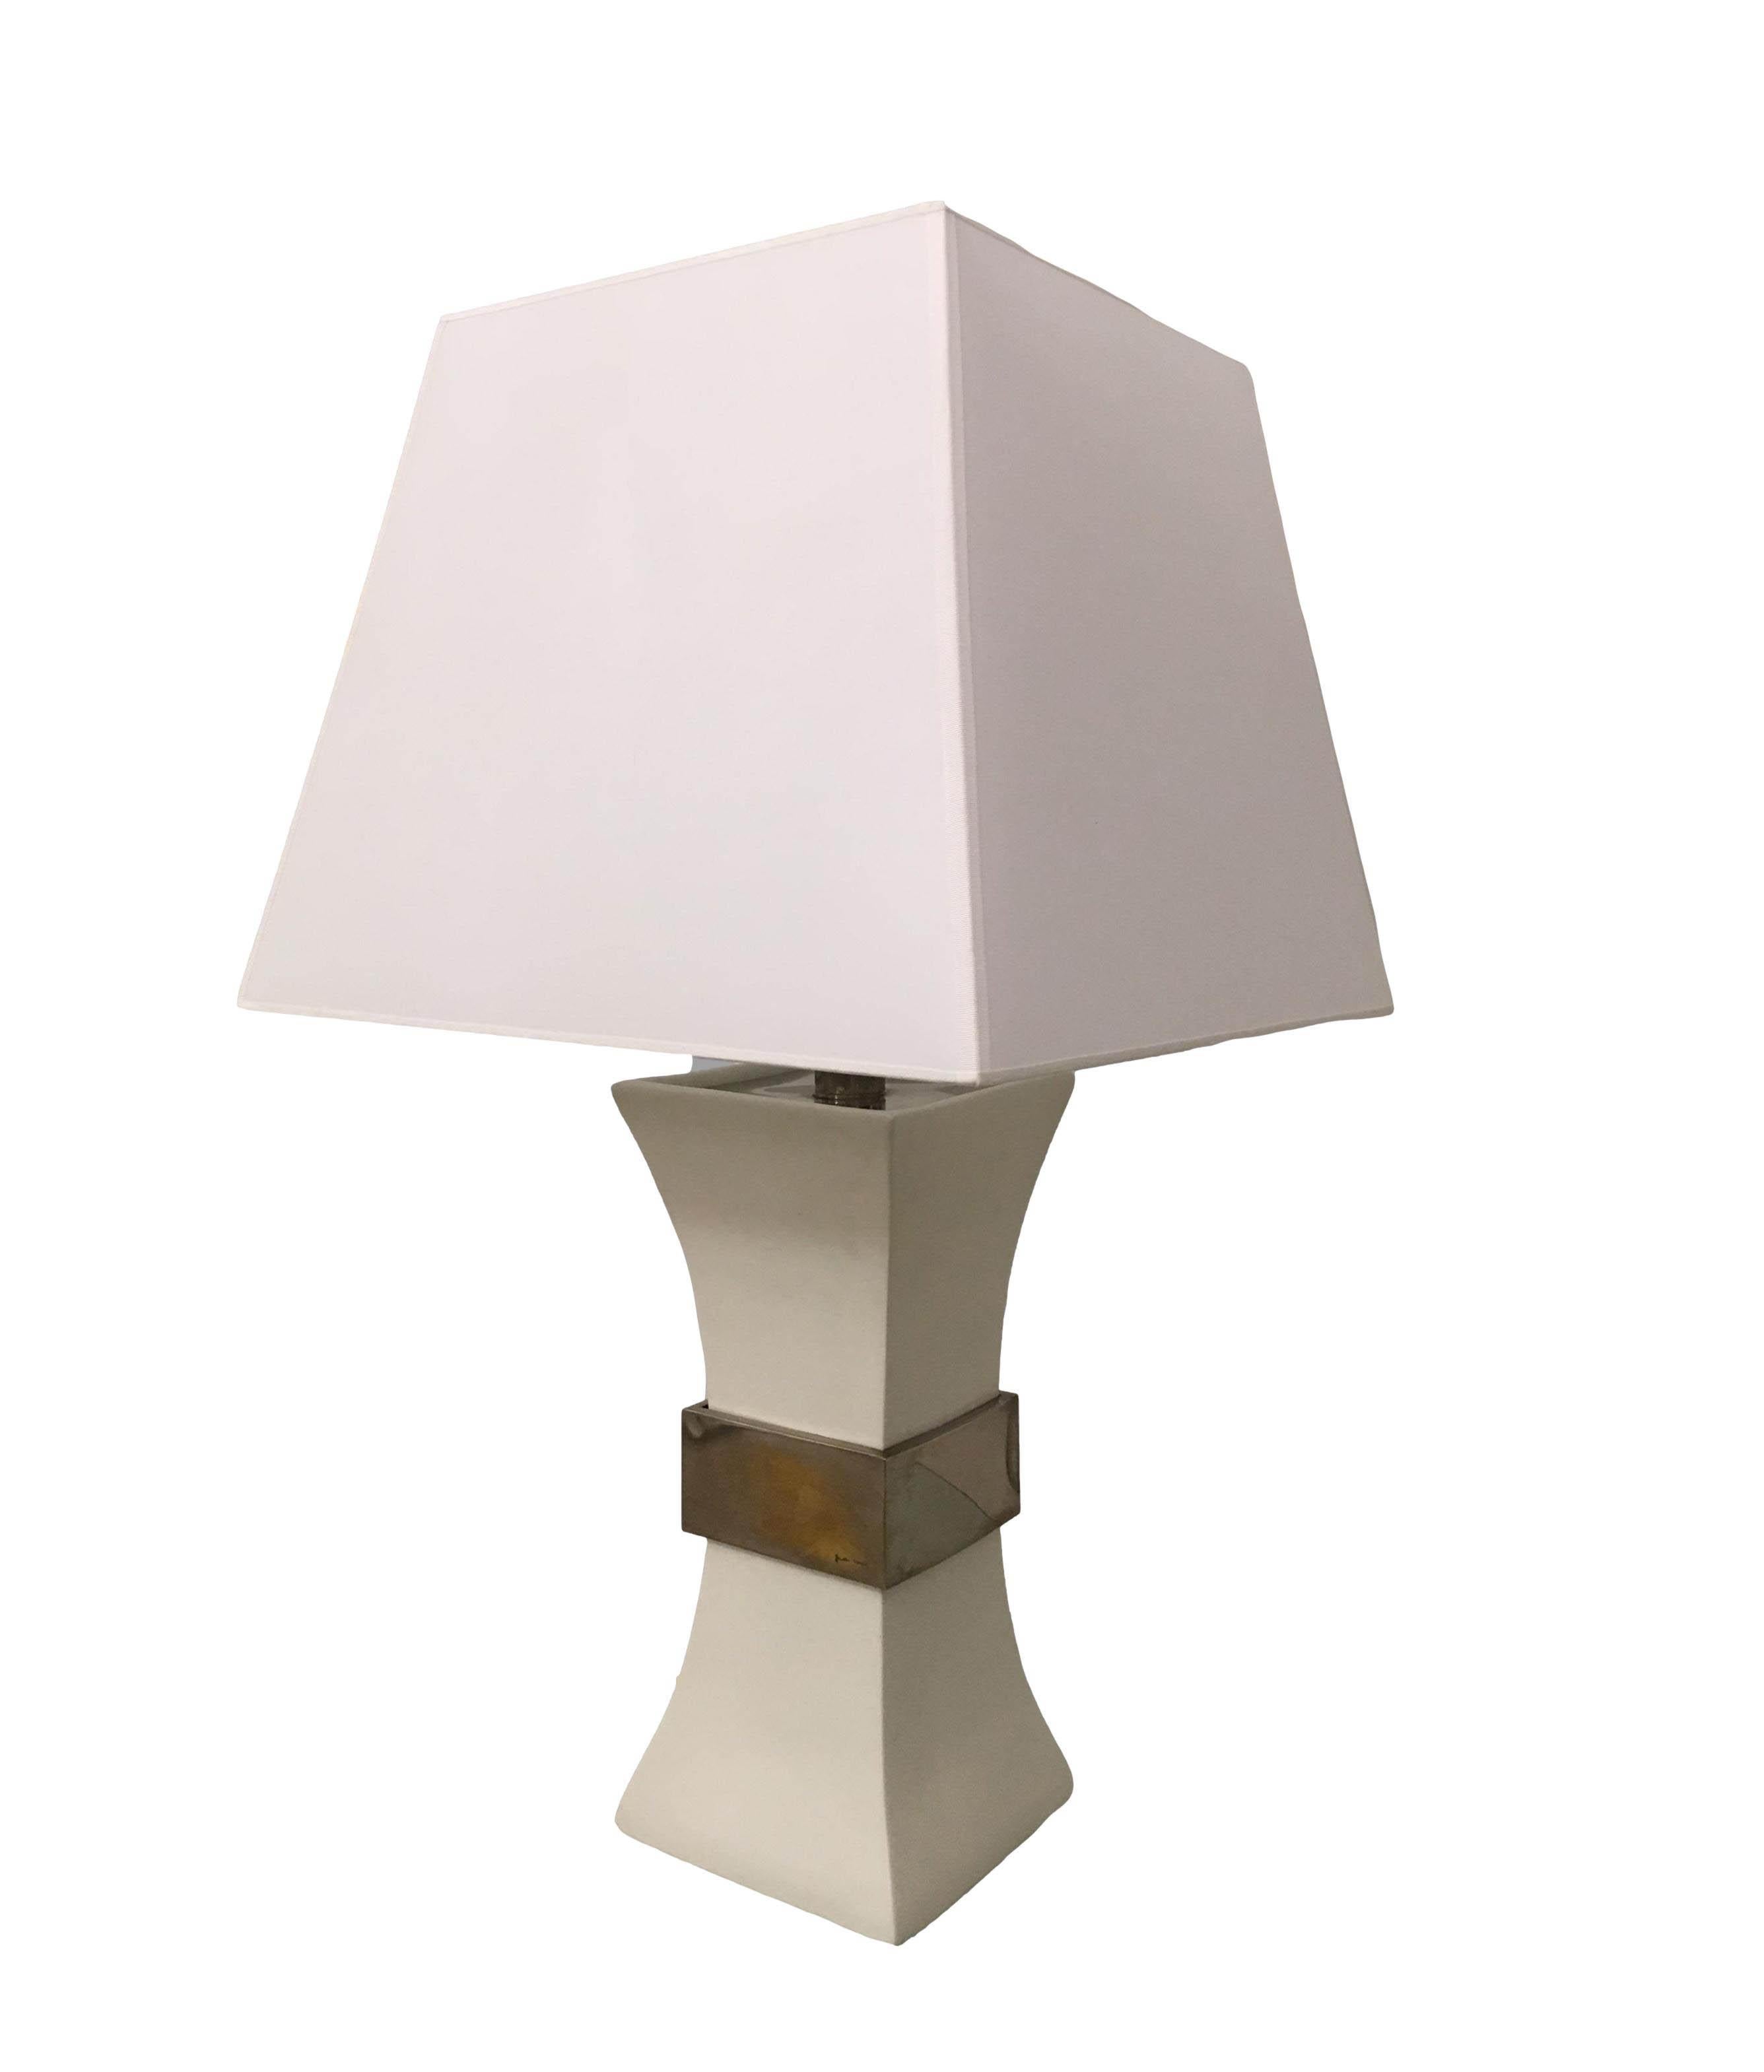 Italian Gabriella Crespi Table Lamp in Ceramic and Golden Brass, 1970s, Italy For Sale